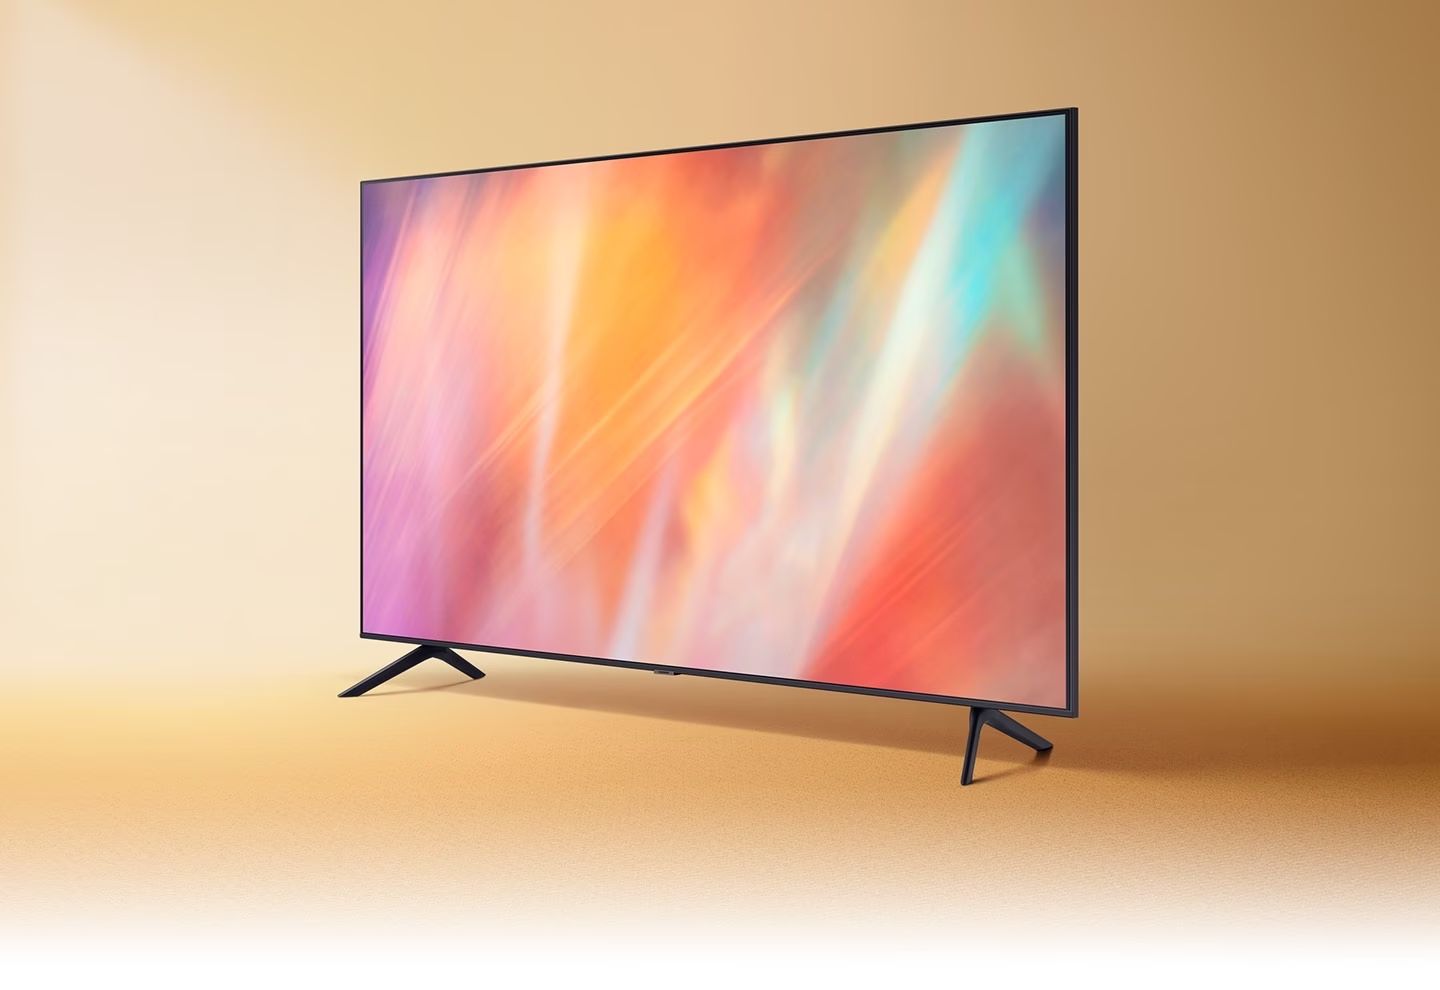 How Much Is A 65 Inch Samsung Smart TV